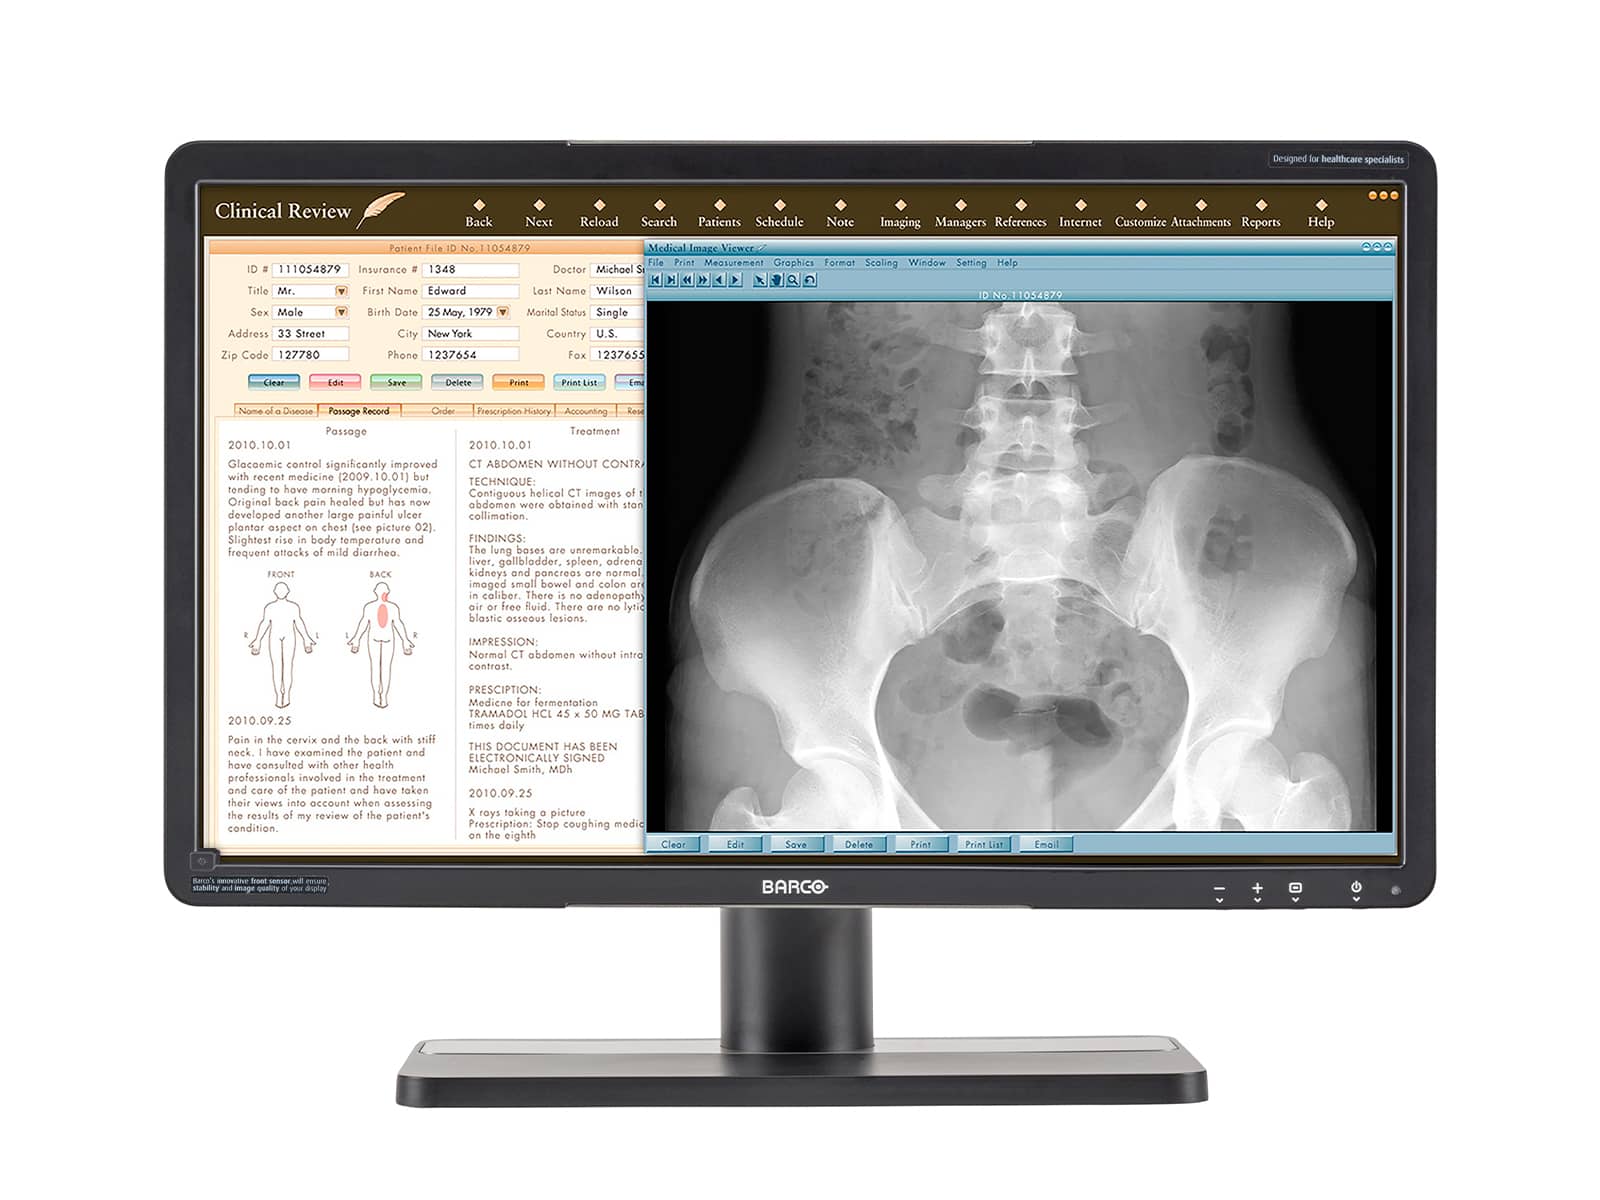 Barco Eonis MDRC-2224 2MP 24" Color LED Clinical Review Display Monitor (K9303005A) Monitors.com 